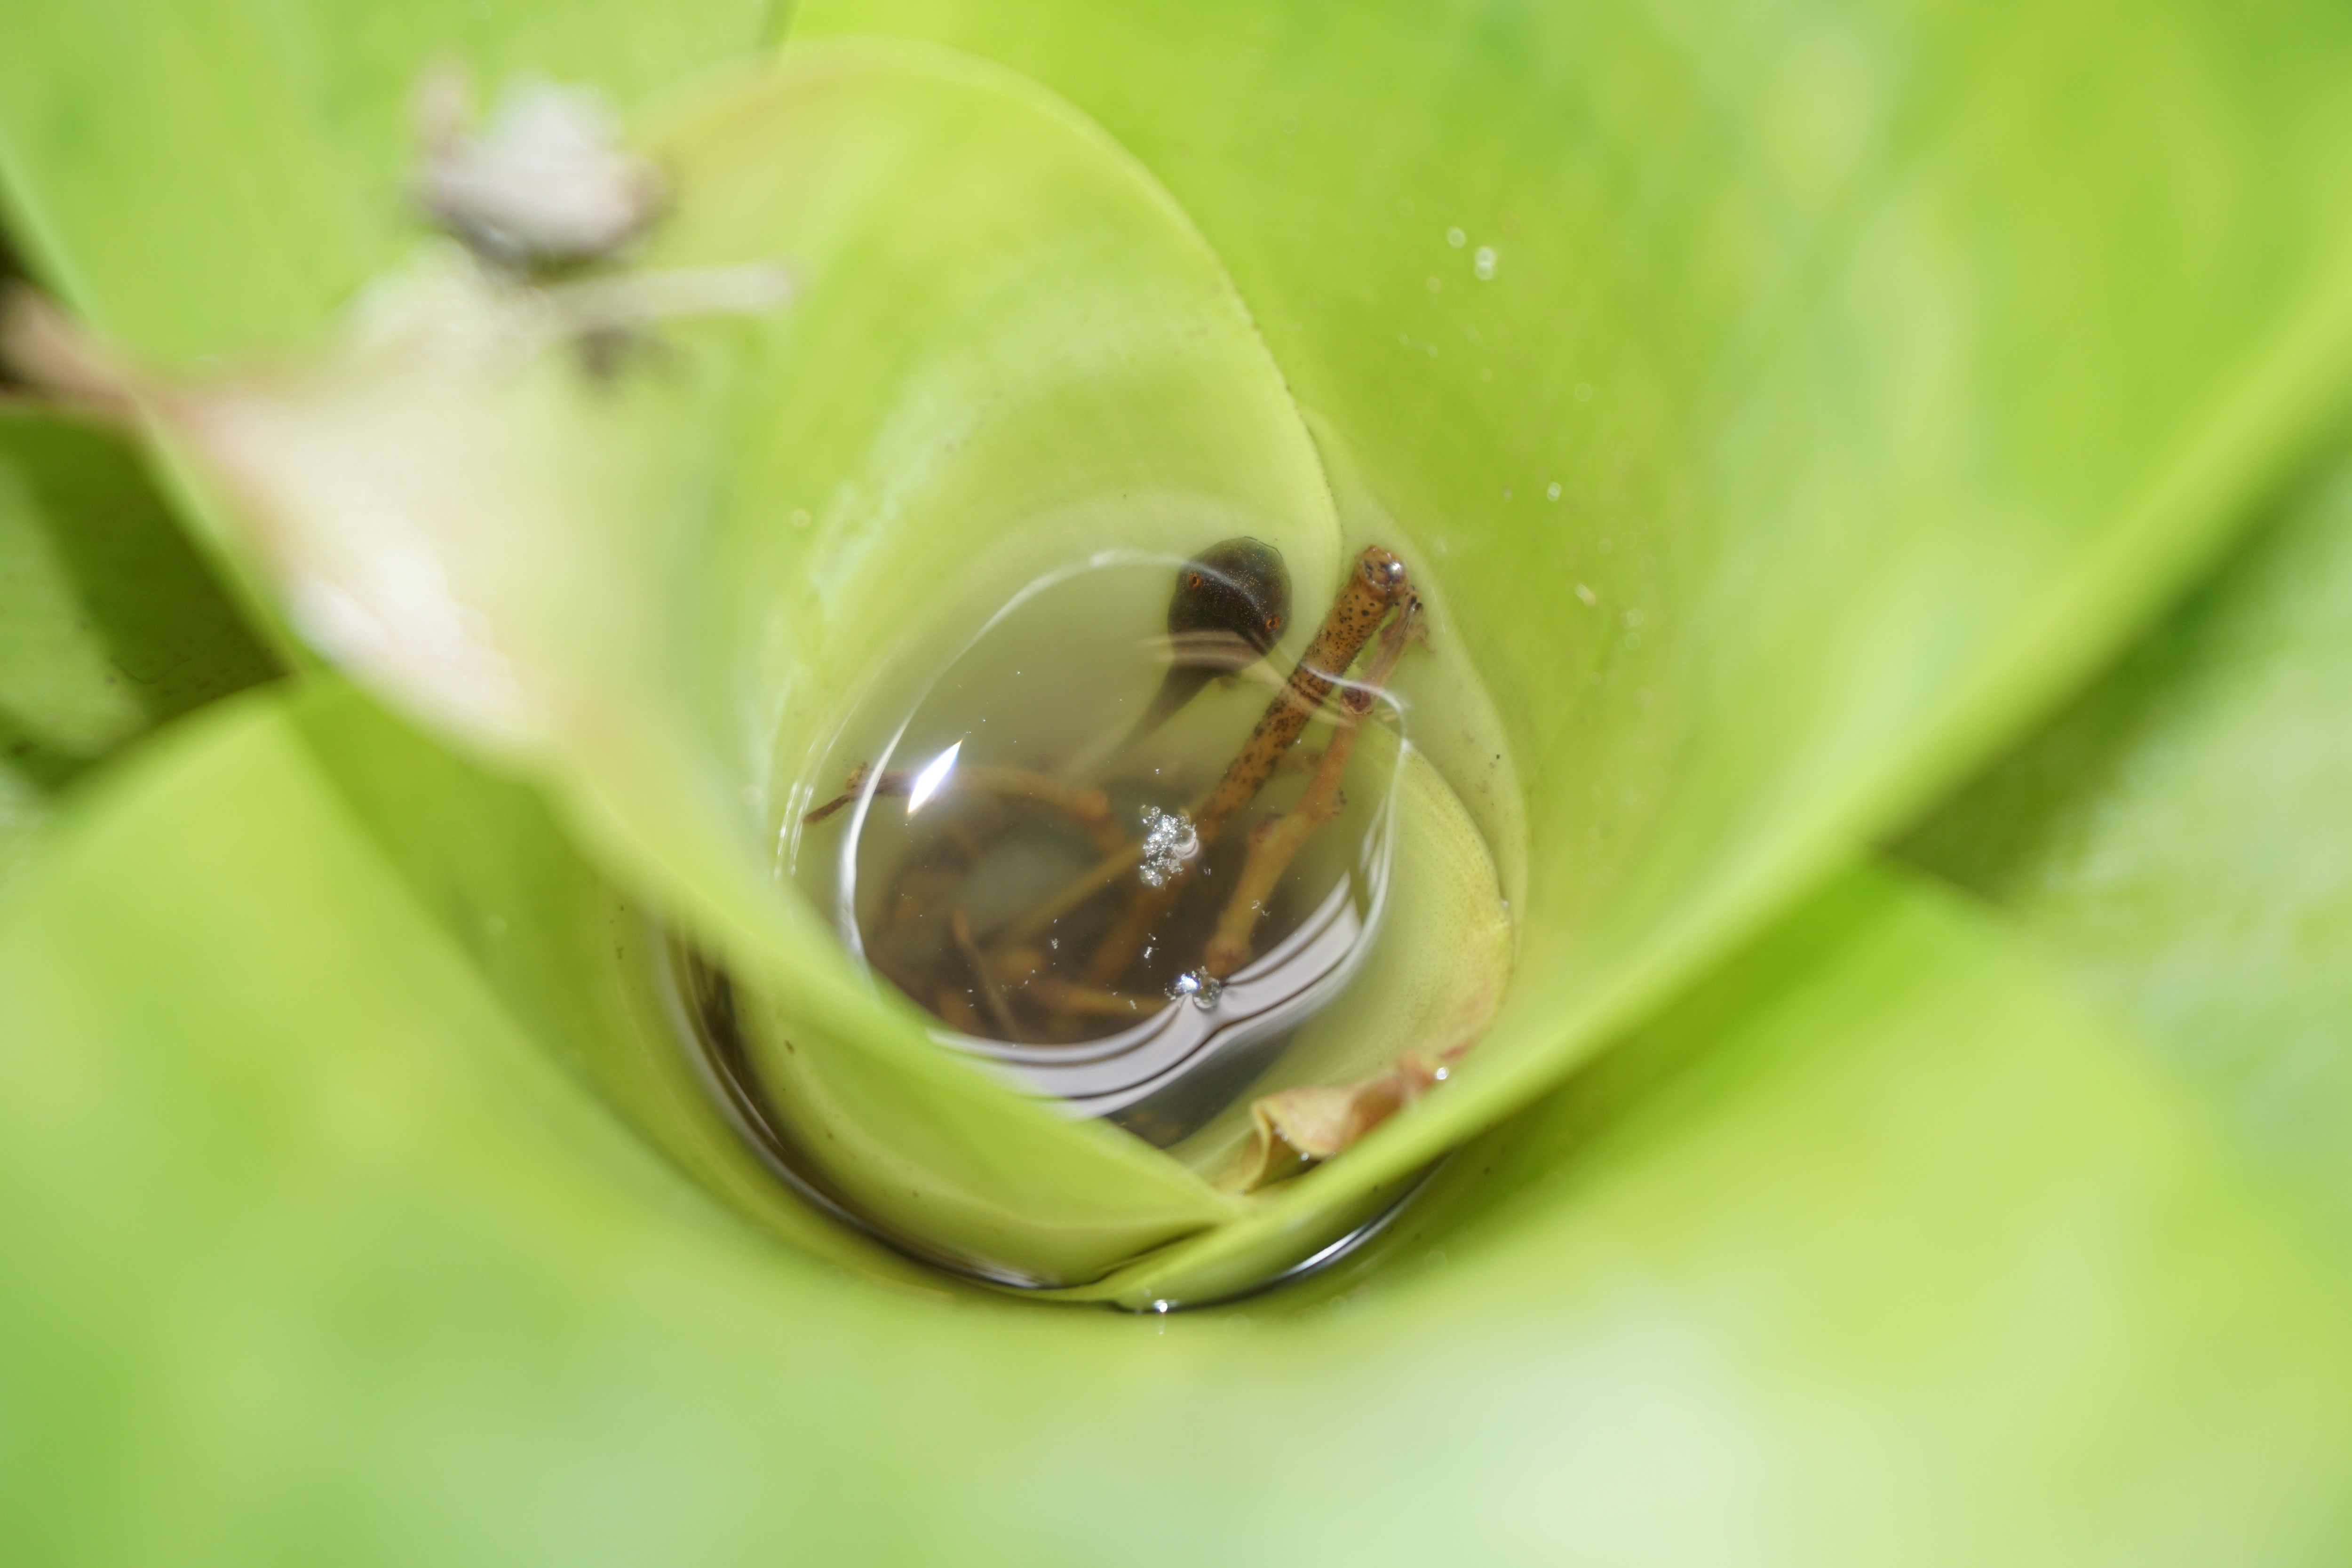 A tadpole is in a small pool of water inside the spiral of leaves of a plant.